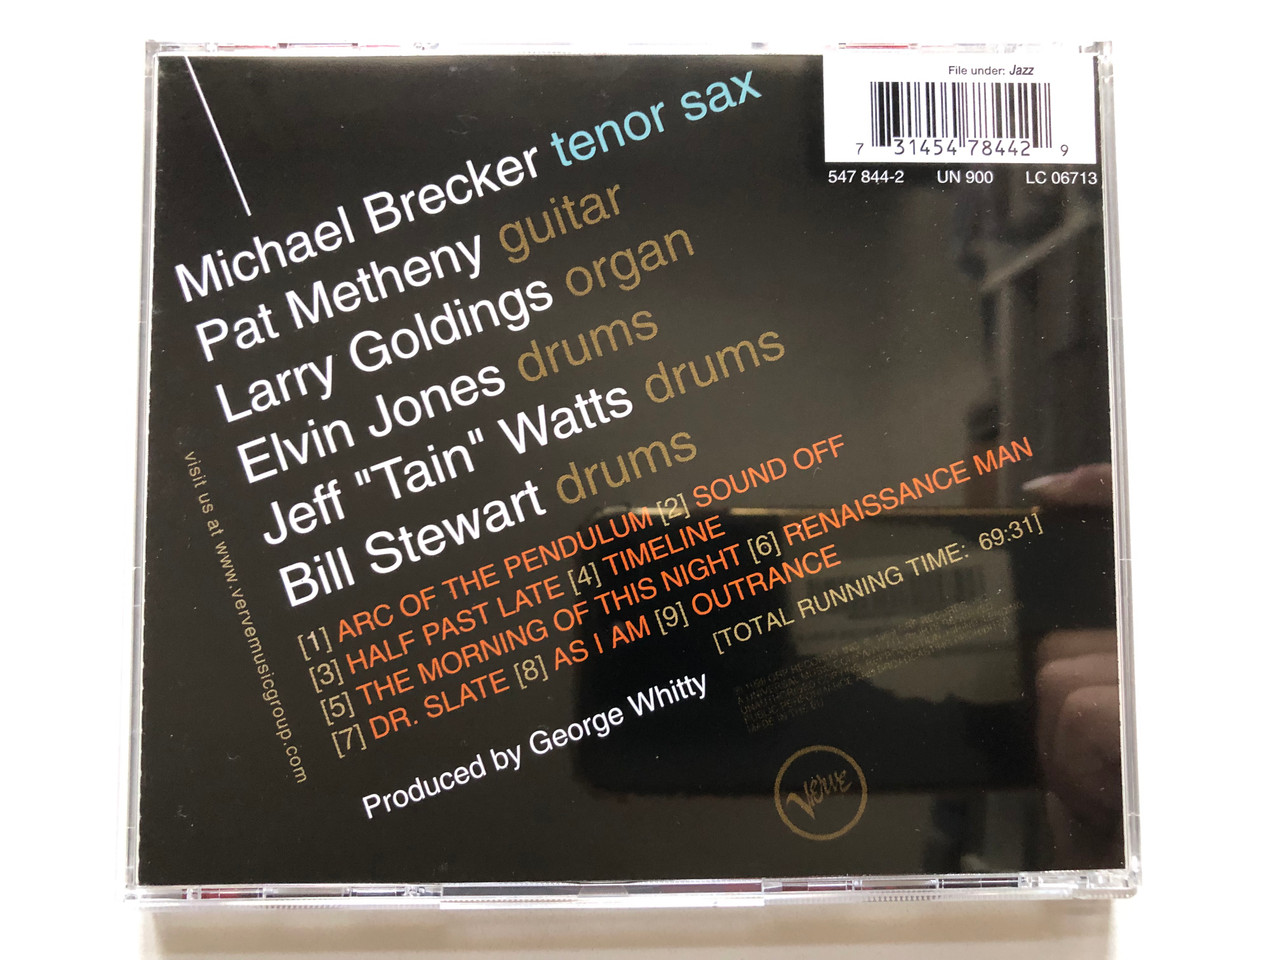 https://cdn10.bigcommerce.com/s-62bdpkt7pb/products/0/images/313325/Michael_Brecker_Time_Is_Of_The_Essence_Verve_Records_Audio_CD_1999_547_844-2_2__72636.1700671310.1280.1280.JPG?c=2